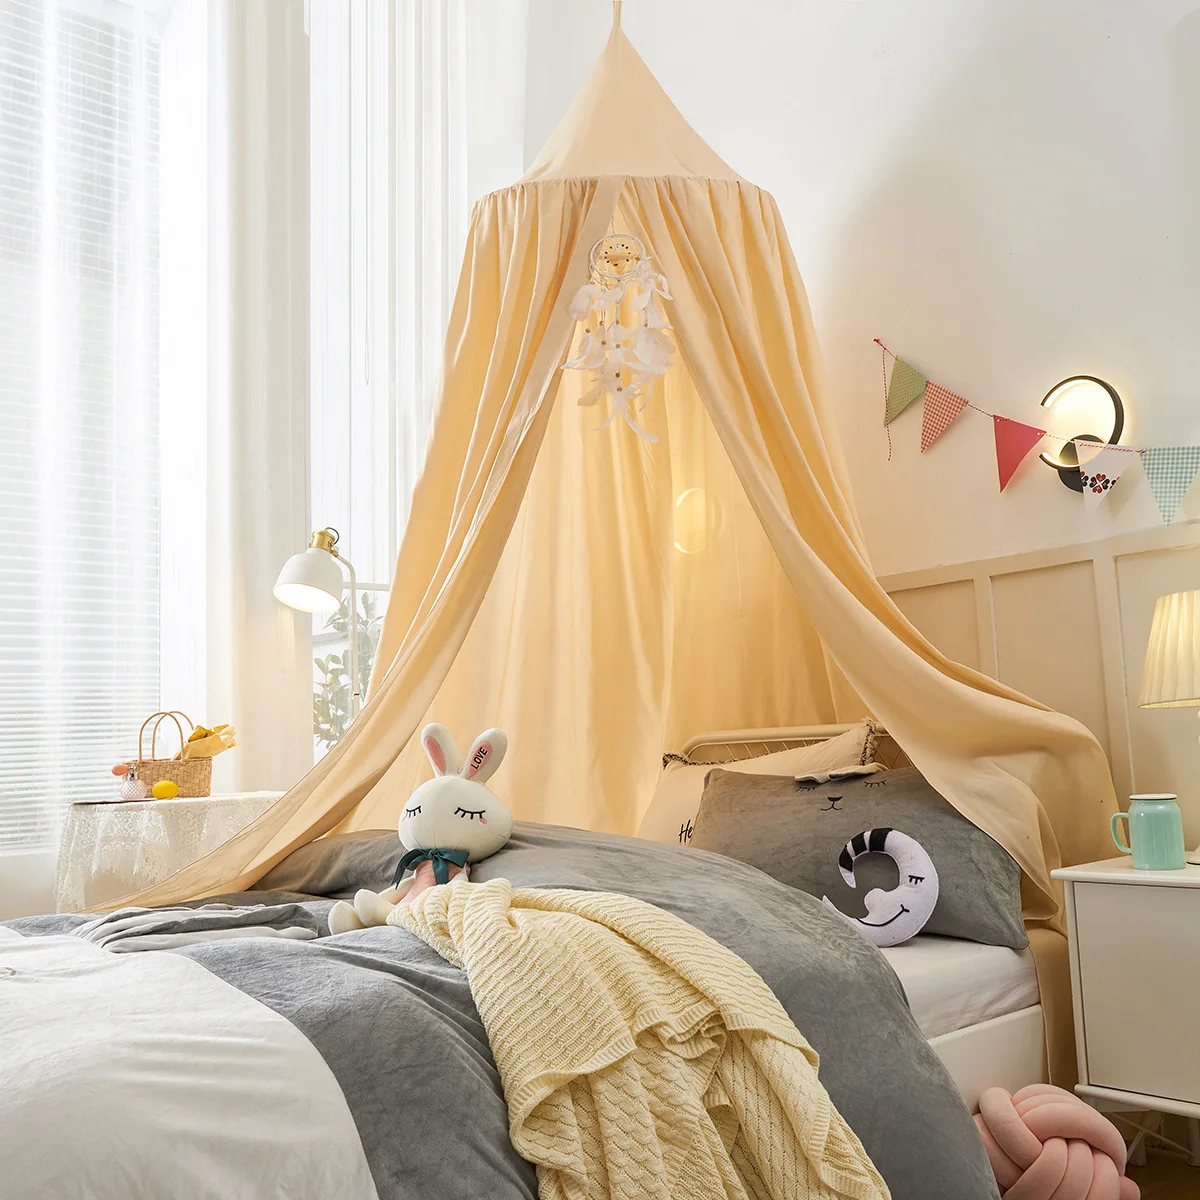 Kids Mosquito Net Baby Crib Curtain Girl Princess Hanging Bed Canopy Home - $56.79